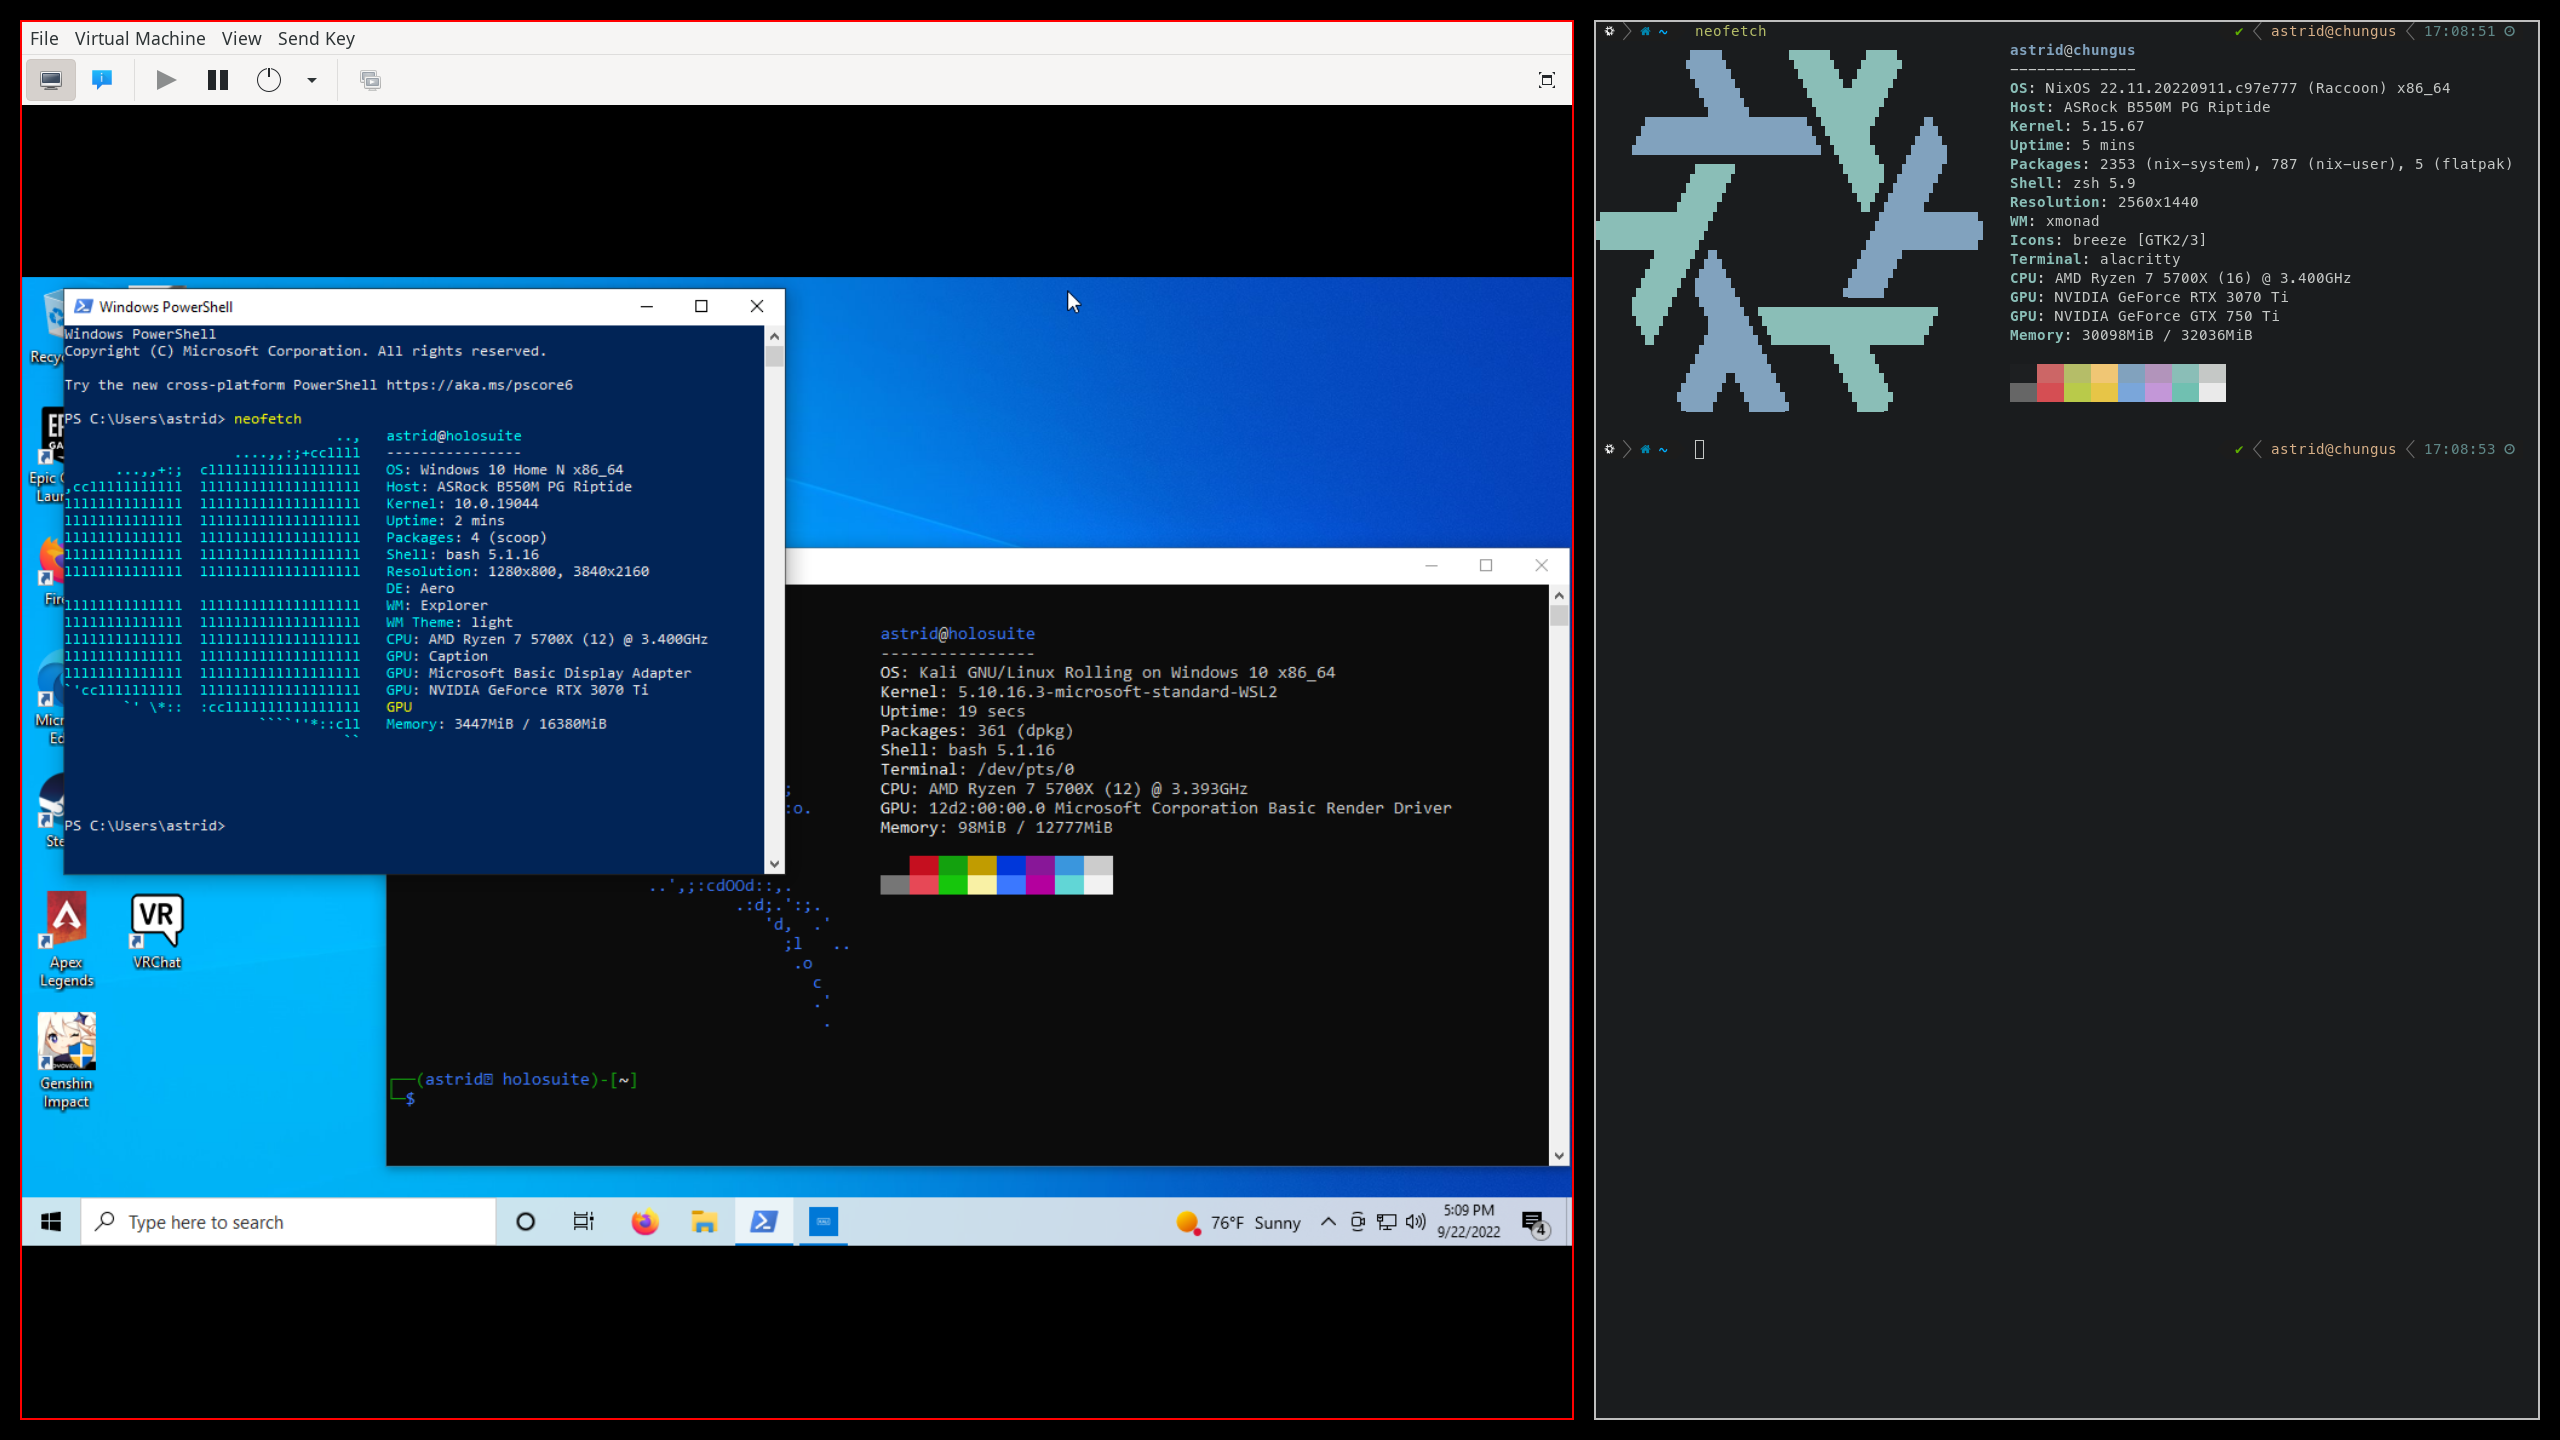 Neofetches for Kali on WSL on Windows on QEMU in Libvirt on NixOS showing all my specs!